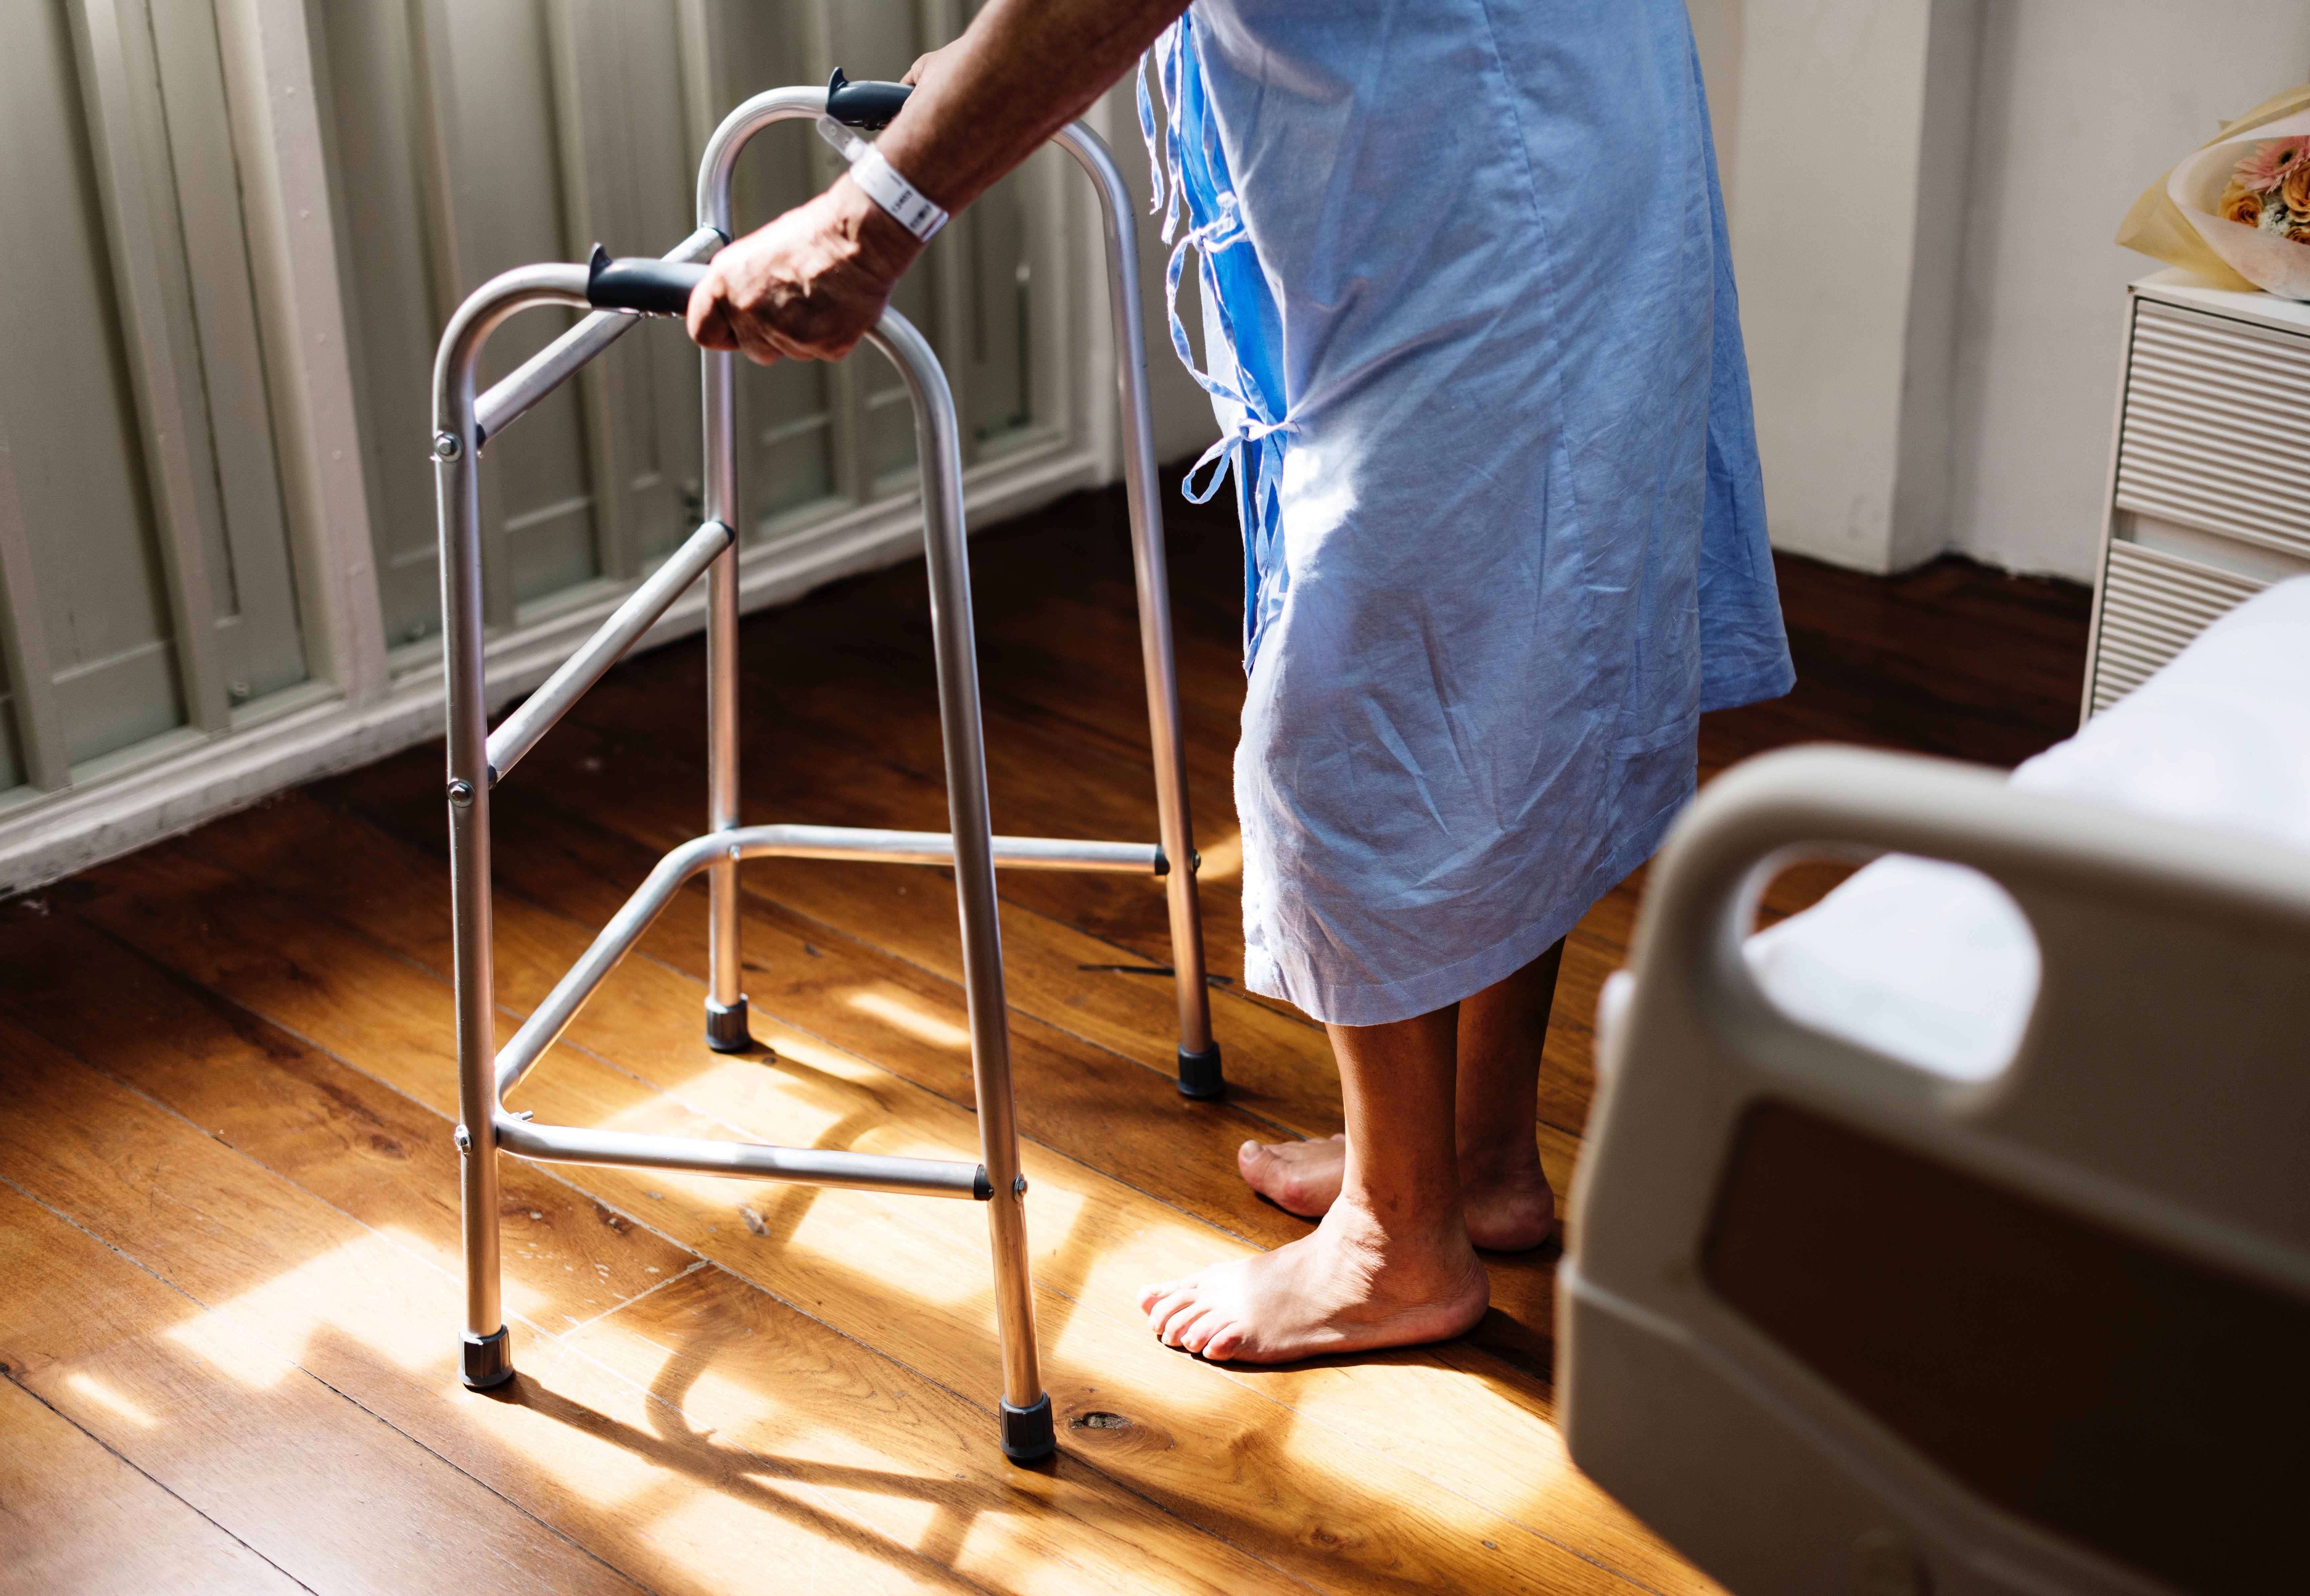 Old man in a hospital trying to walk. | Photo: Pexels